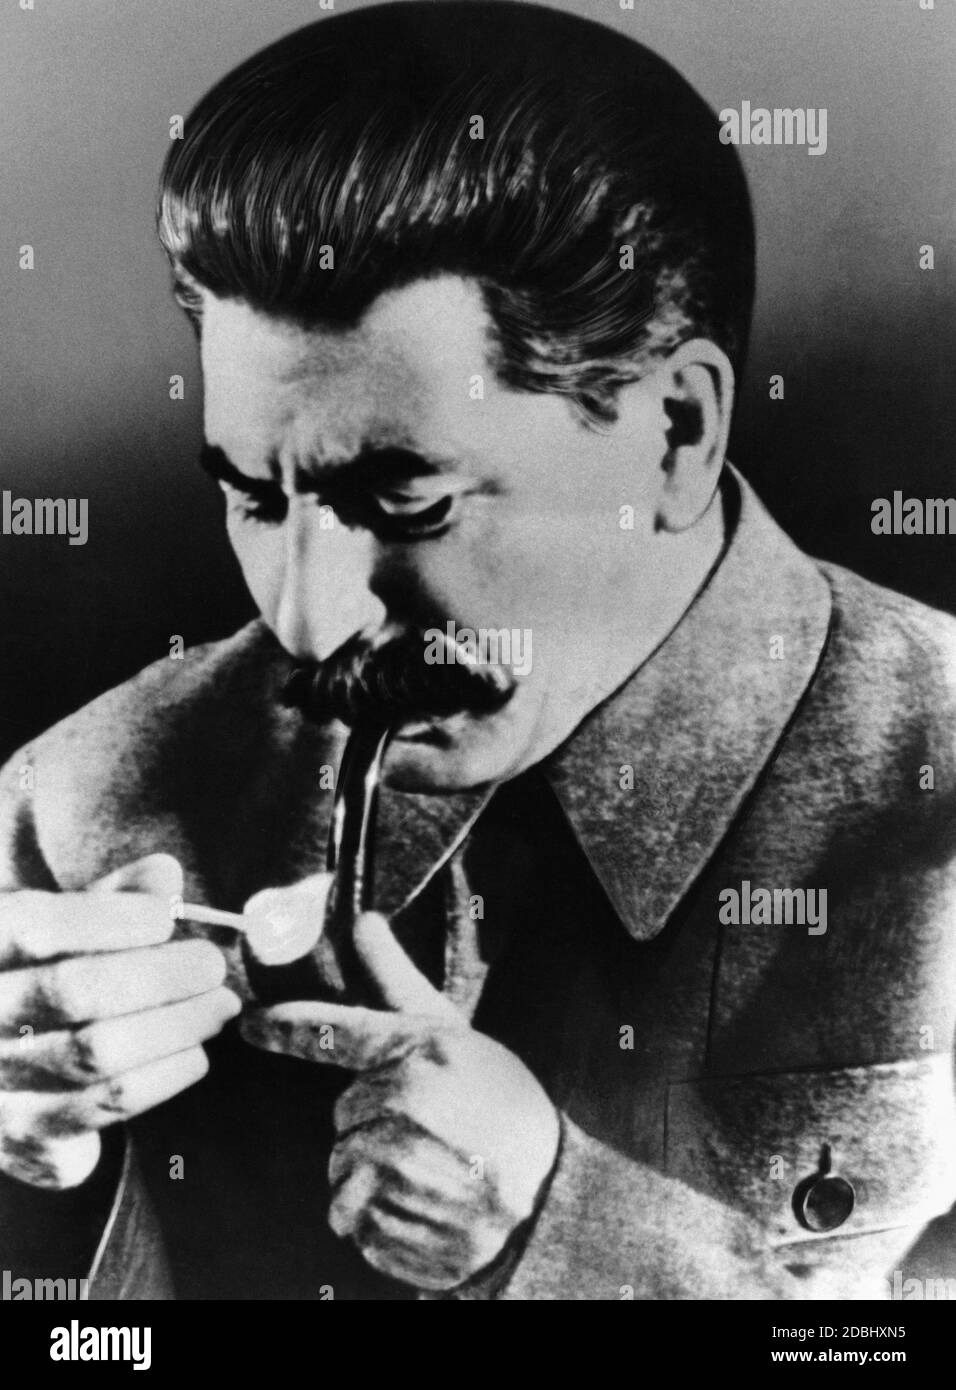 Ioseb Besarionis dz? Djugashvili,adopted name Stalin, dictator of the Soviet Union from 1927 to 1954. Photos of Stalin destined for publication were carefully selected and were intended to support the personality cult around him. Stock Photo